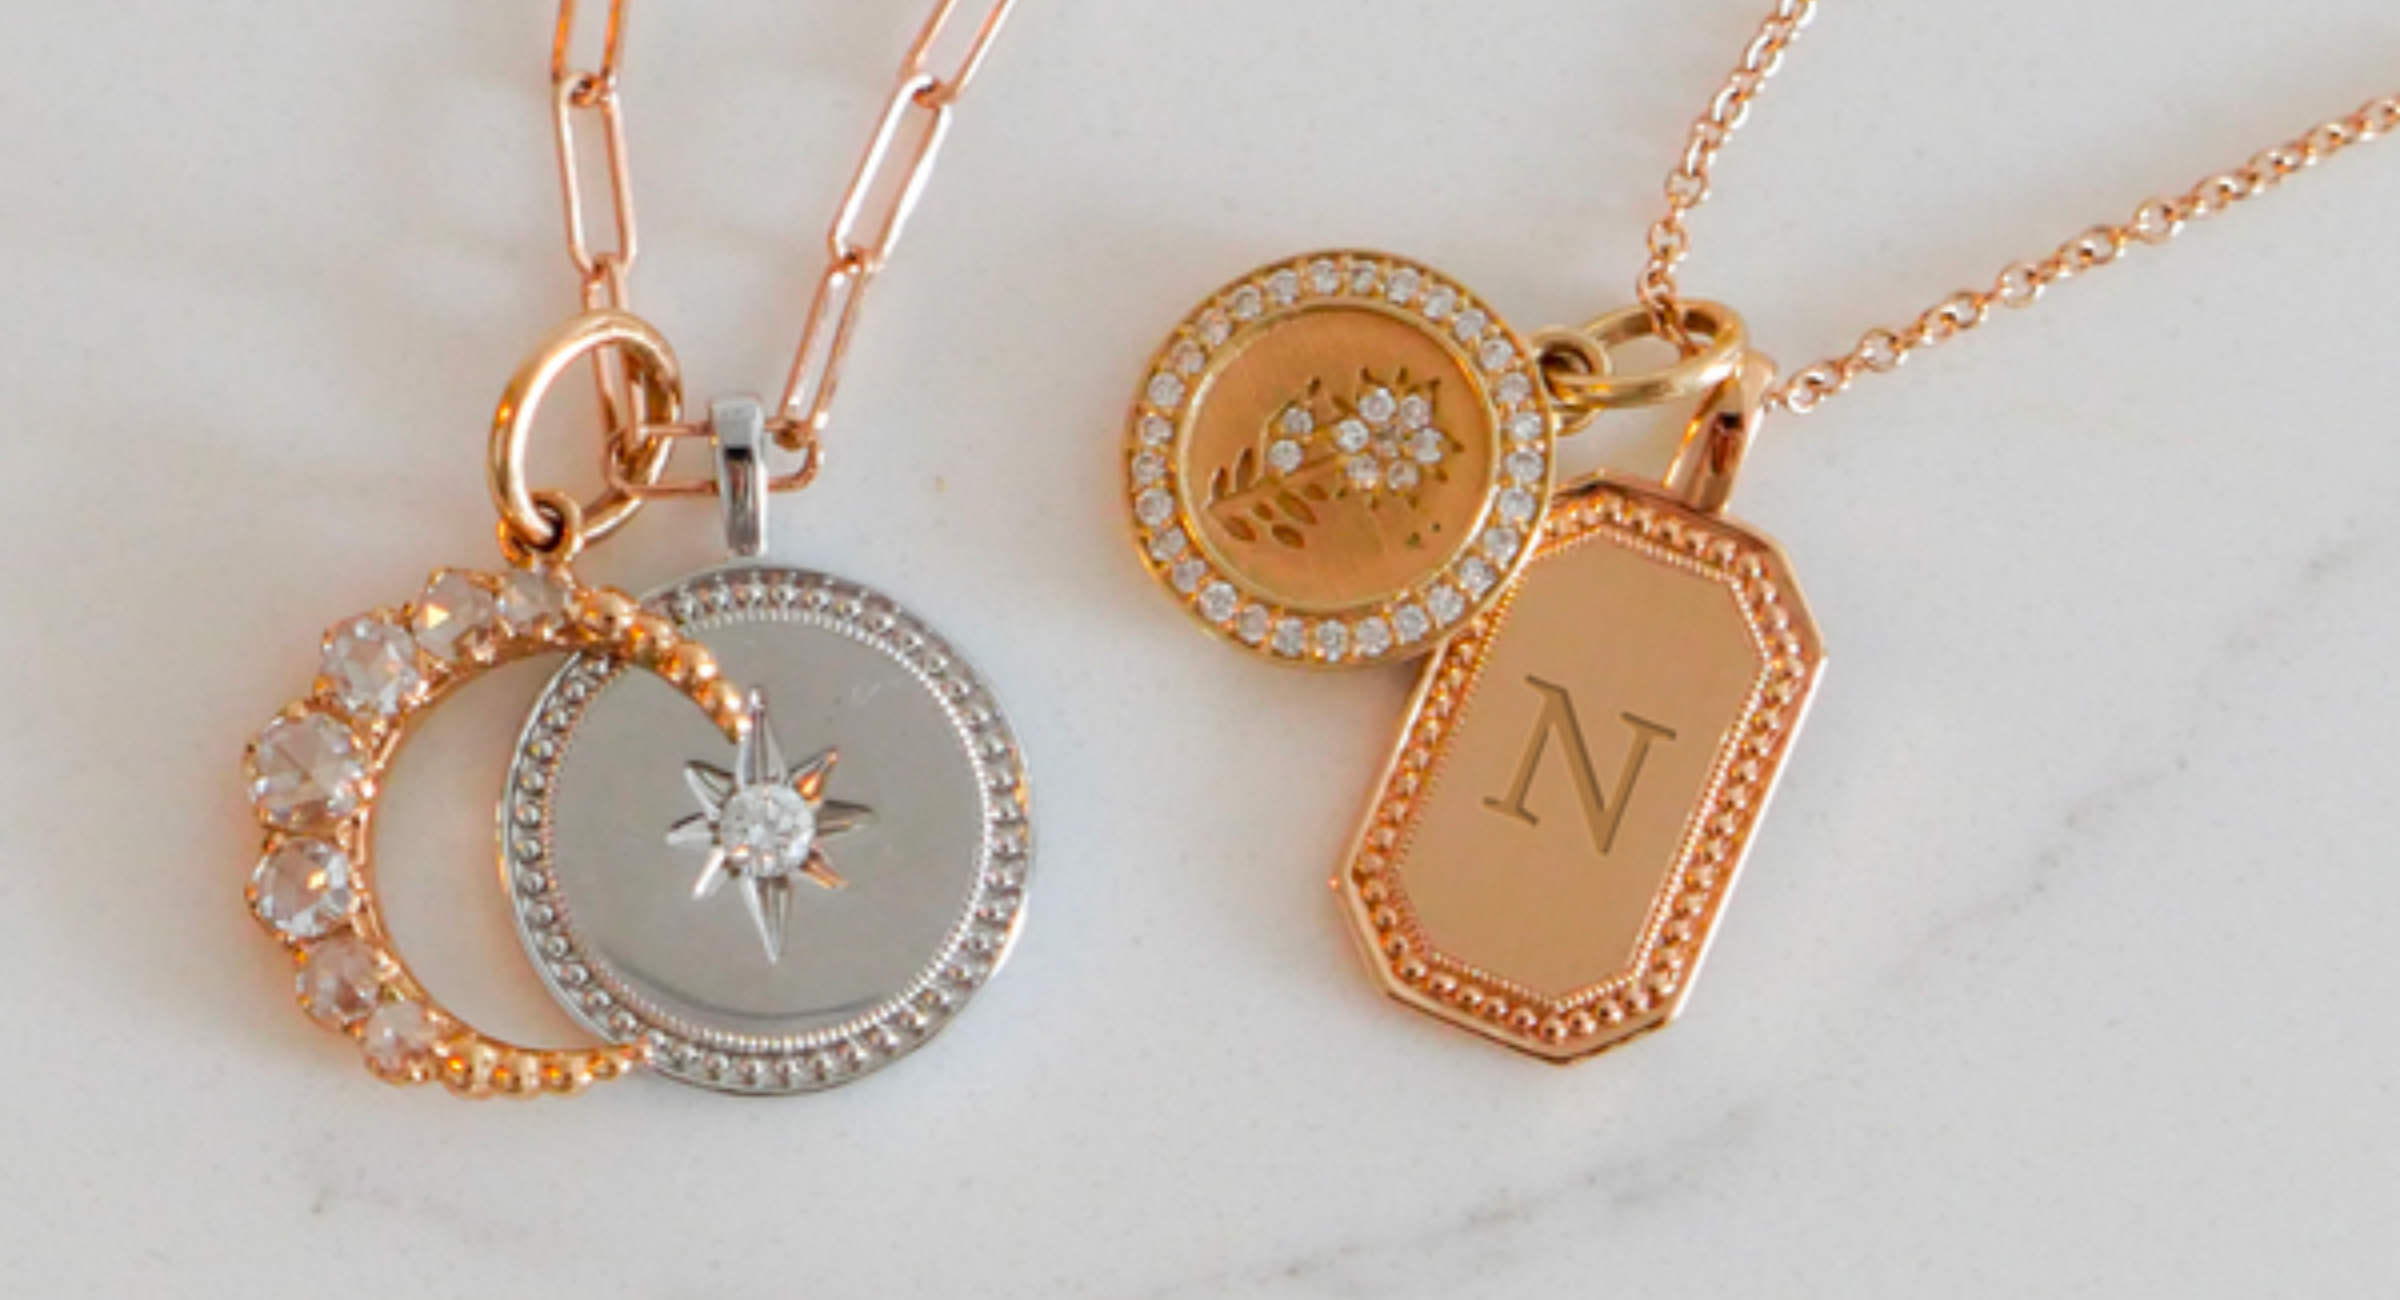 Assortment of pendants and charms in mixed 18K yellow and rose gold